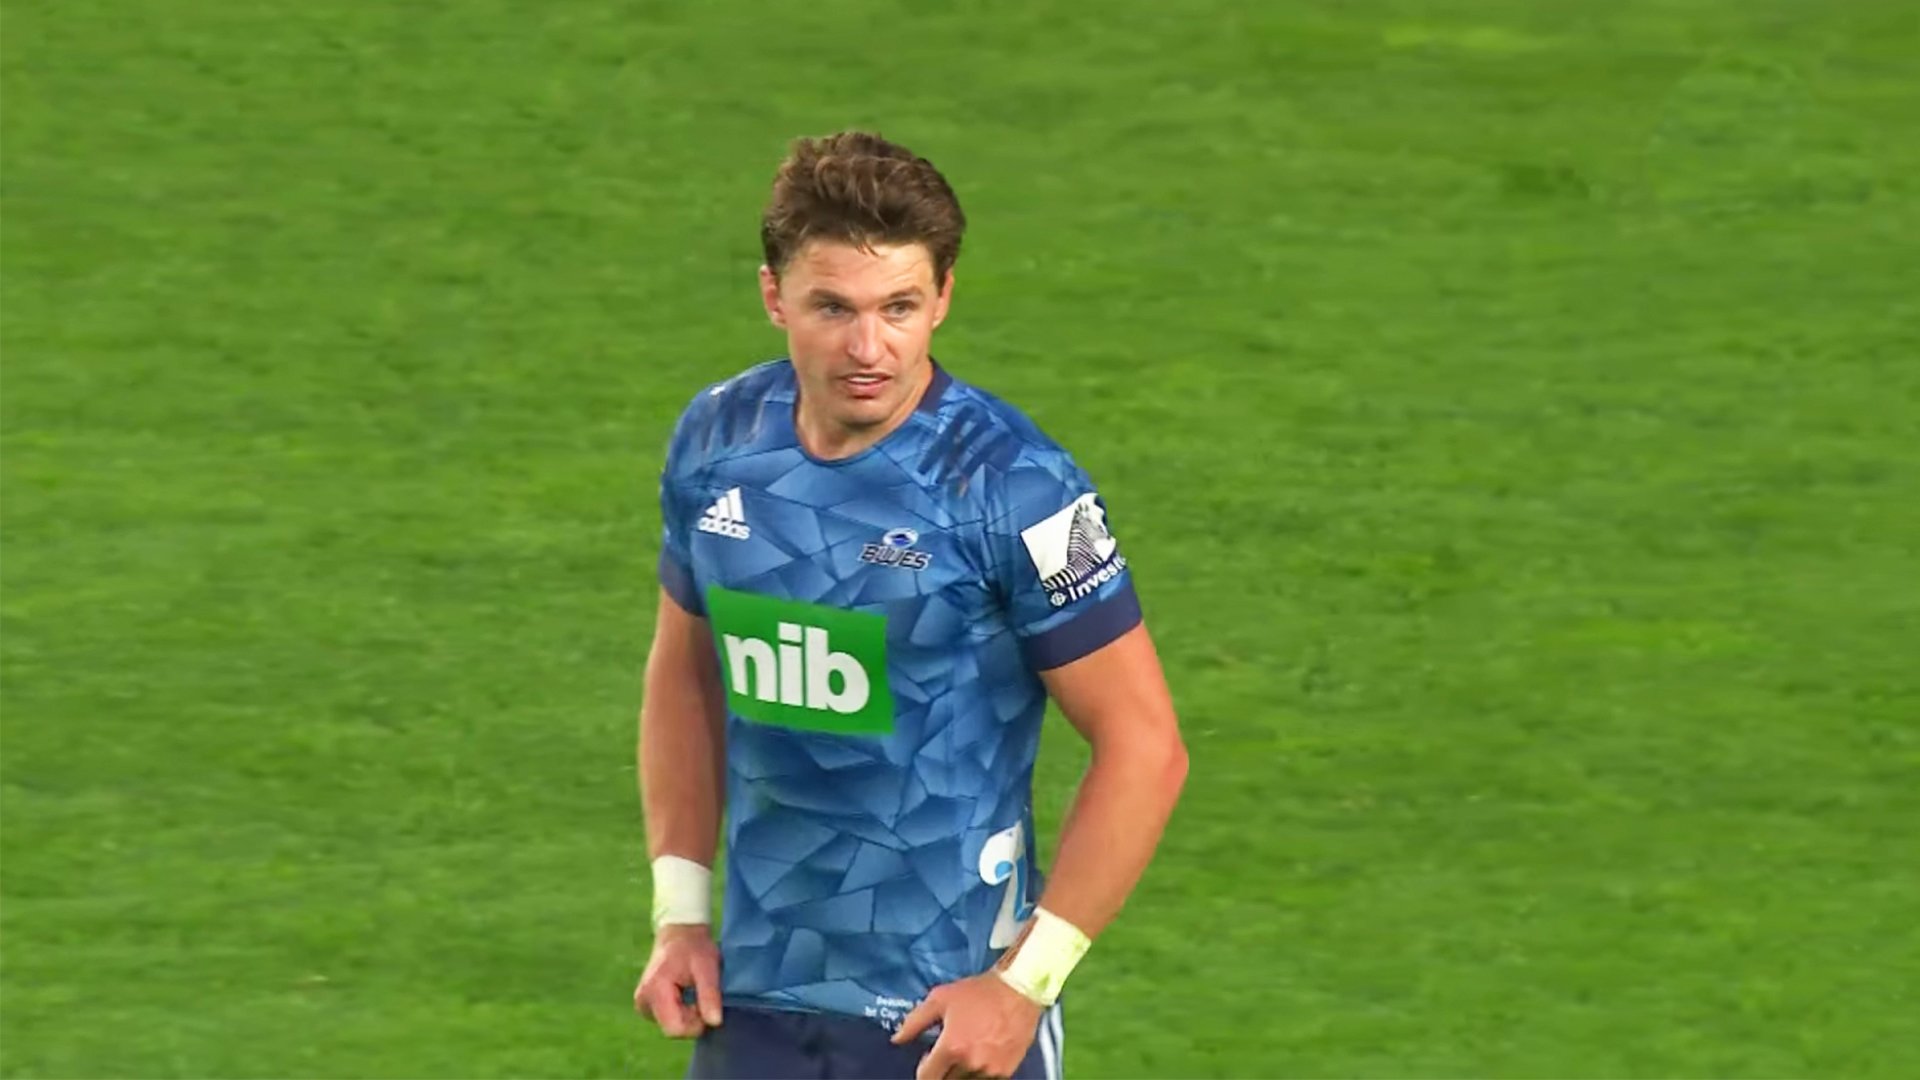 The All Blacks have just released Beauden Barrett's player cam and it's outstanding